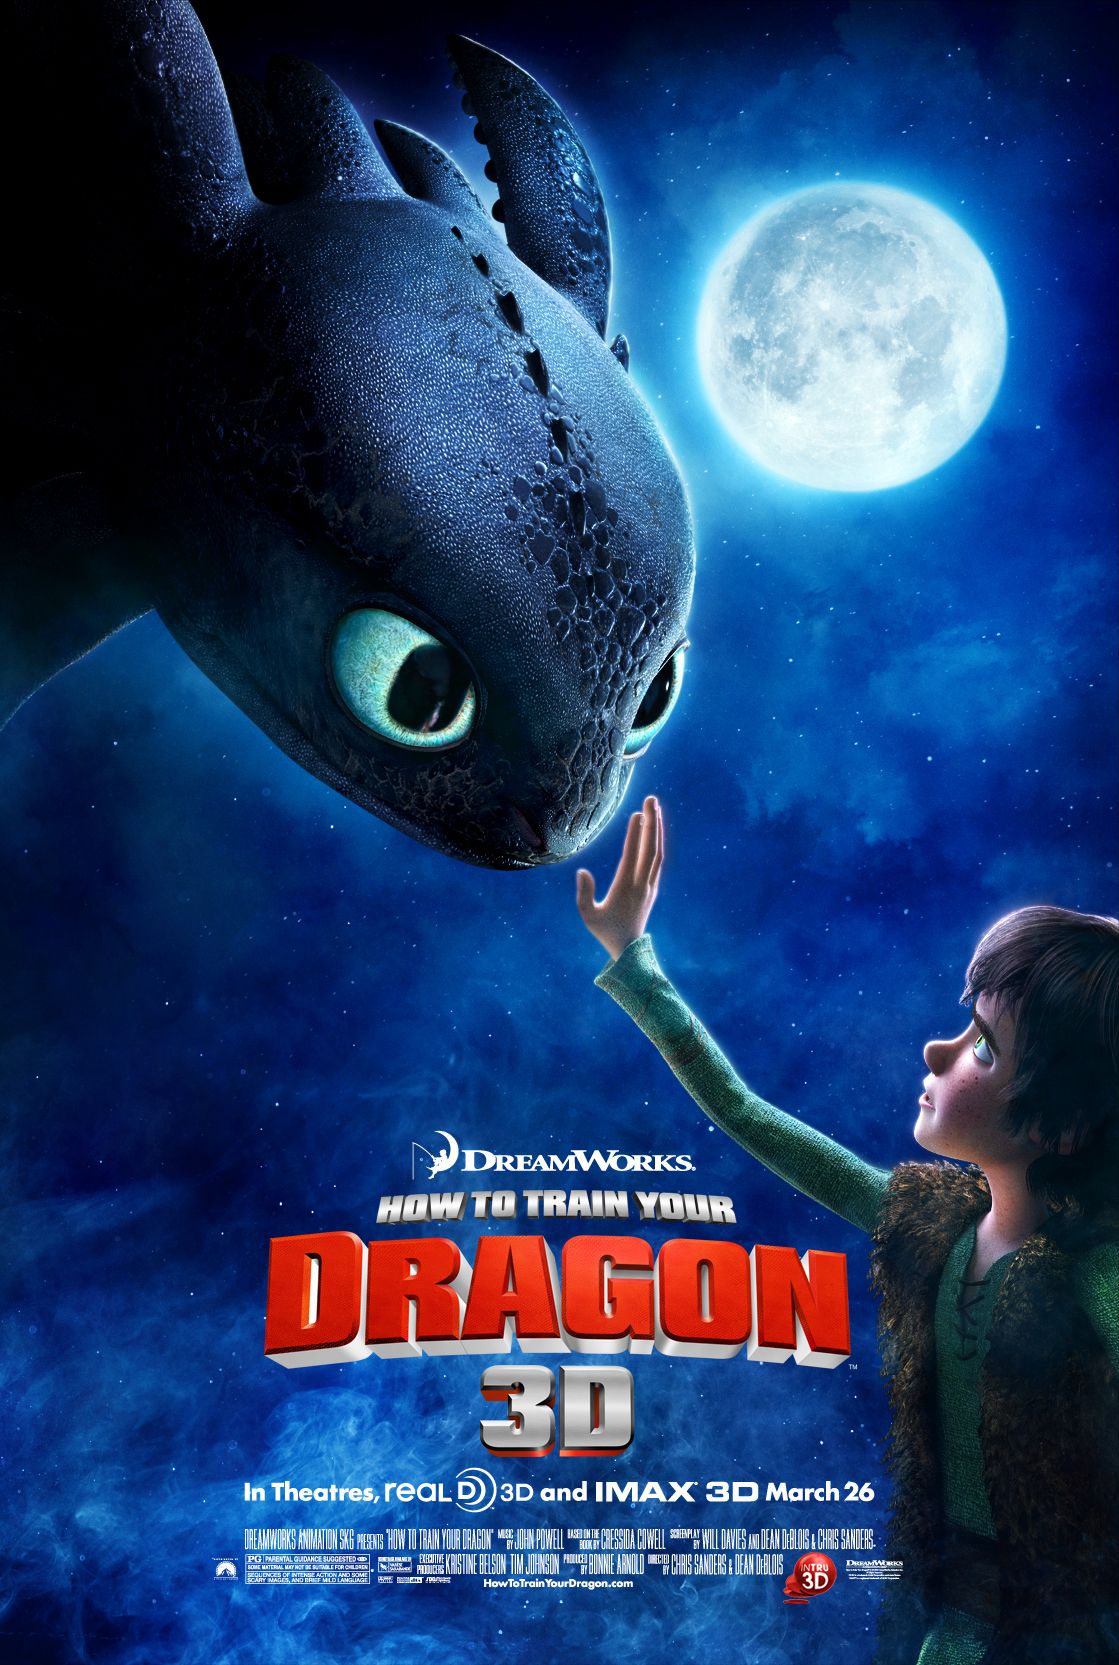 How to Train Your Dragon (2010) Hindi Dubbed Full Movie